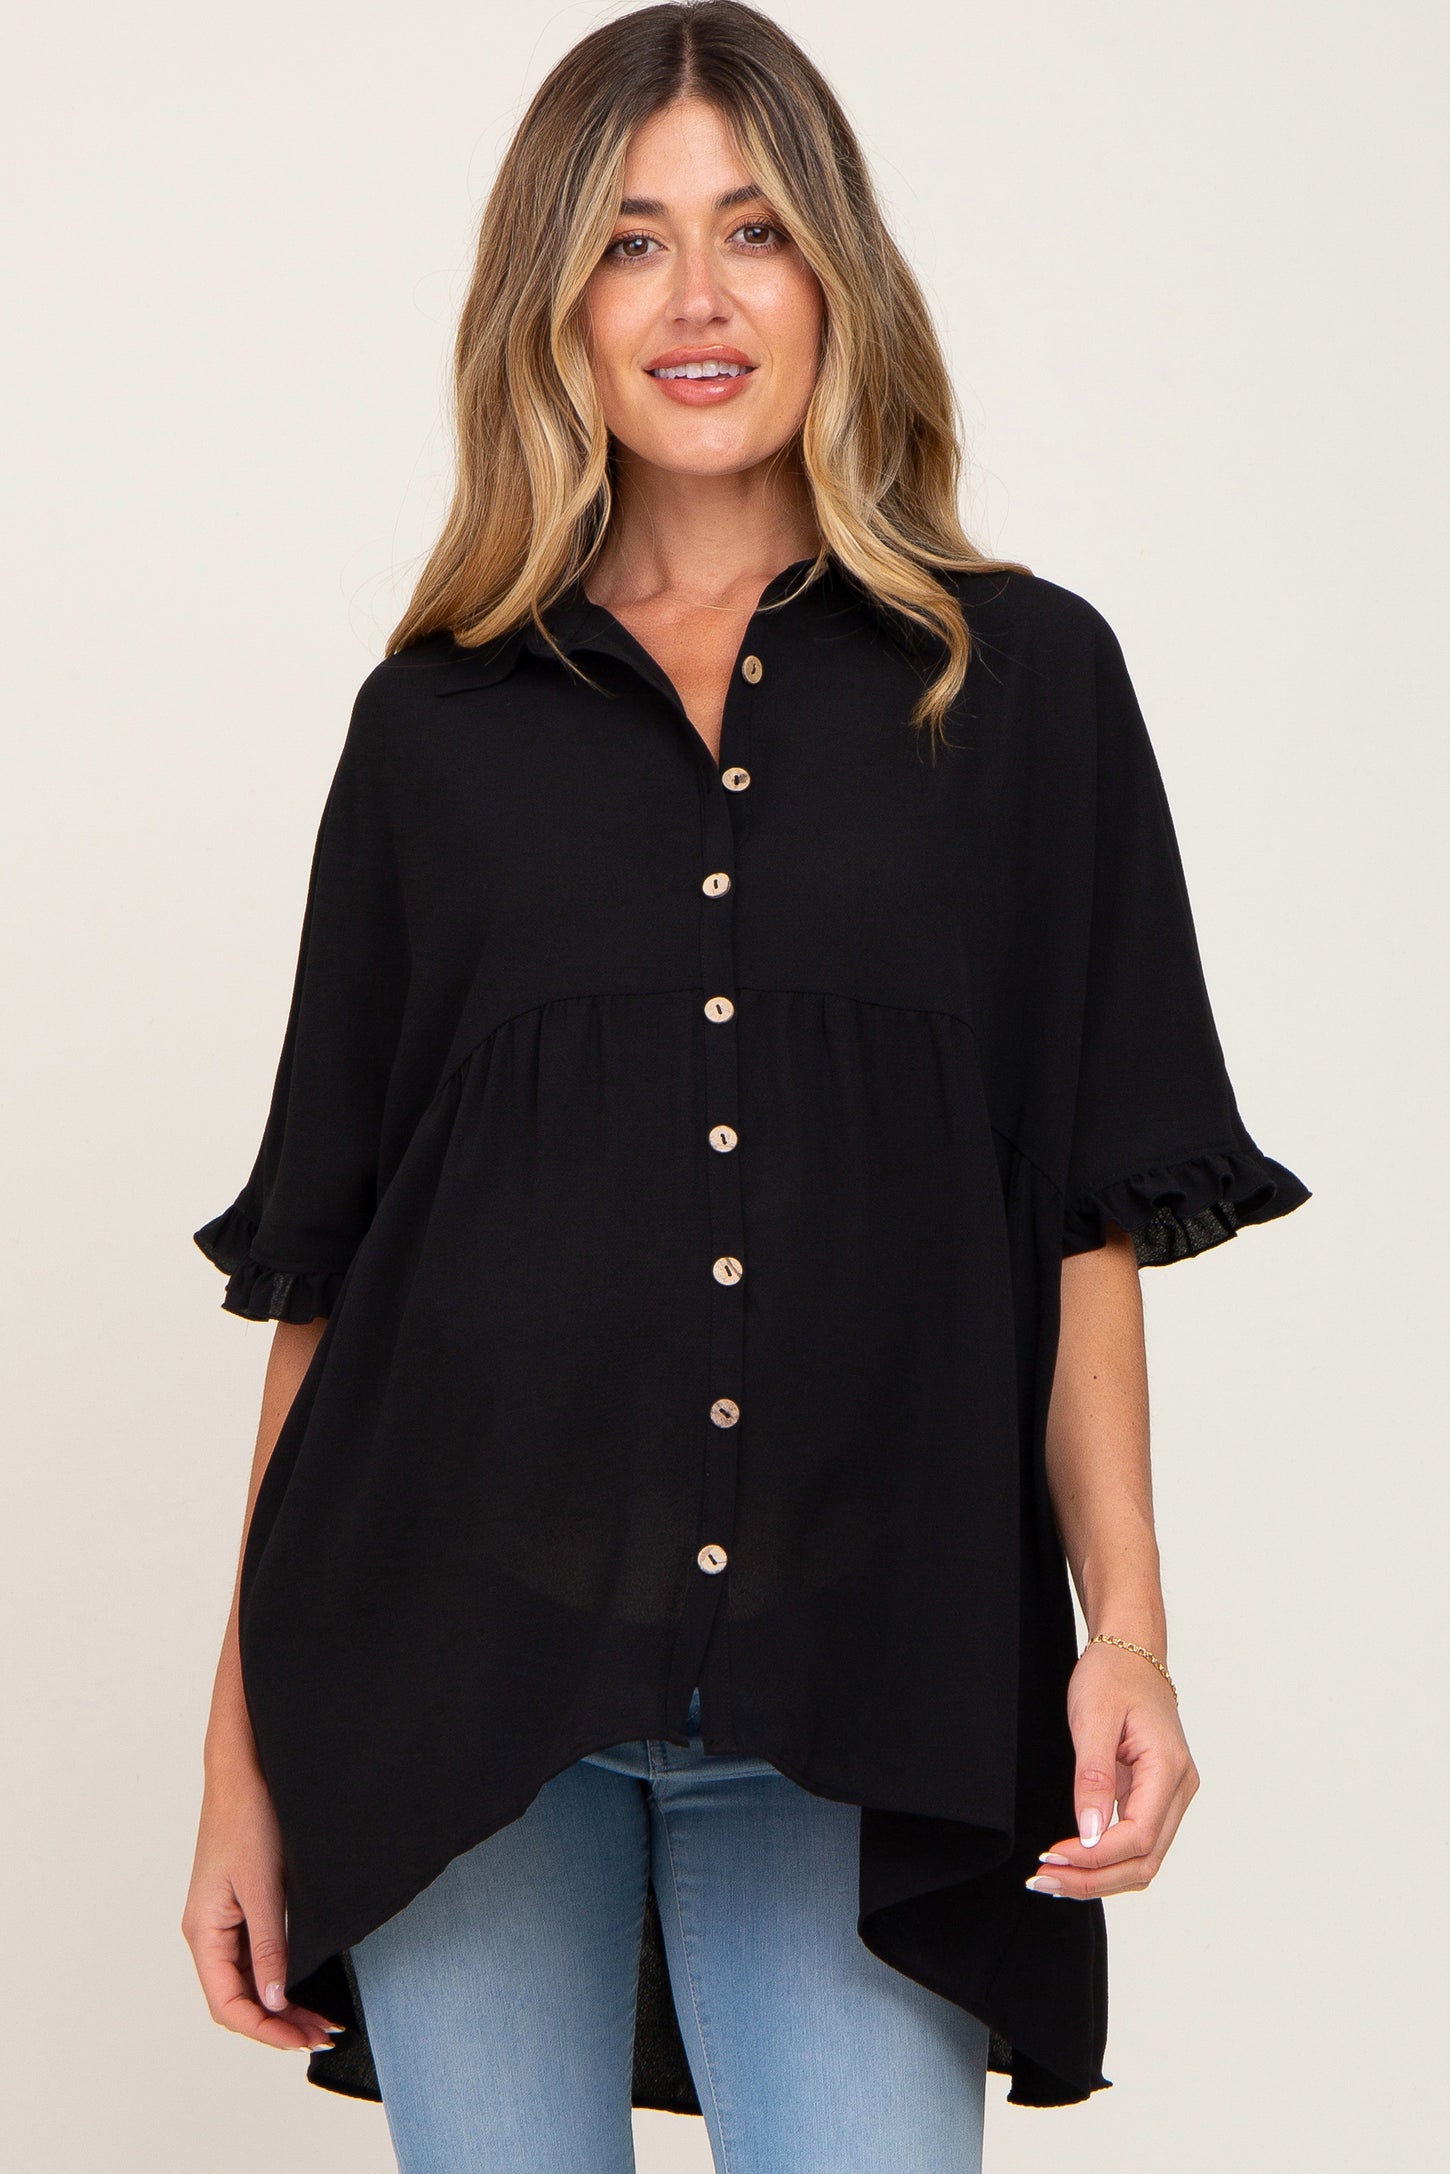 Black Oversized Button Front Ruffle Short Sleeve Hi-Low Maternity Top